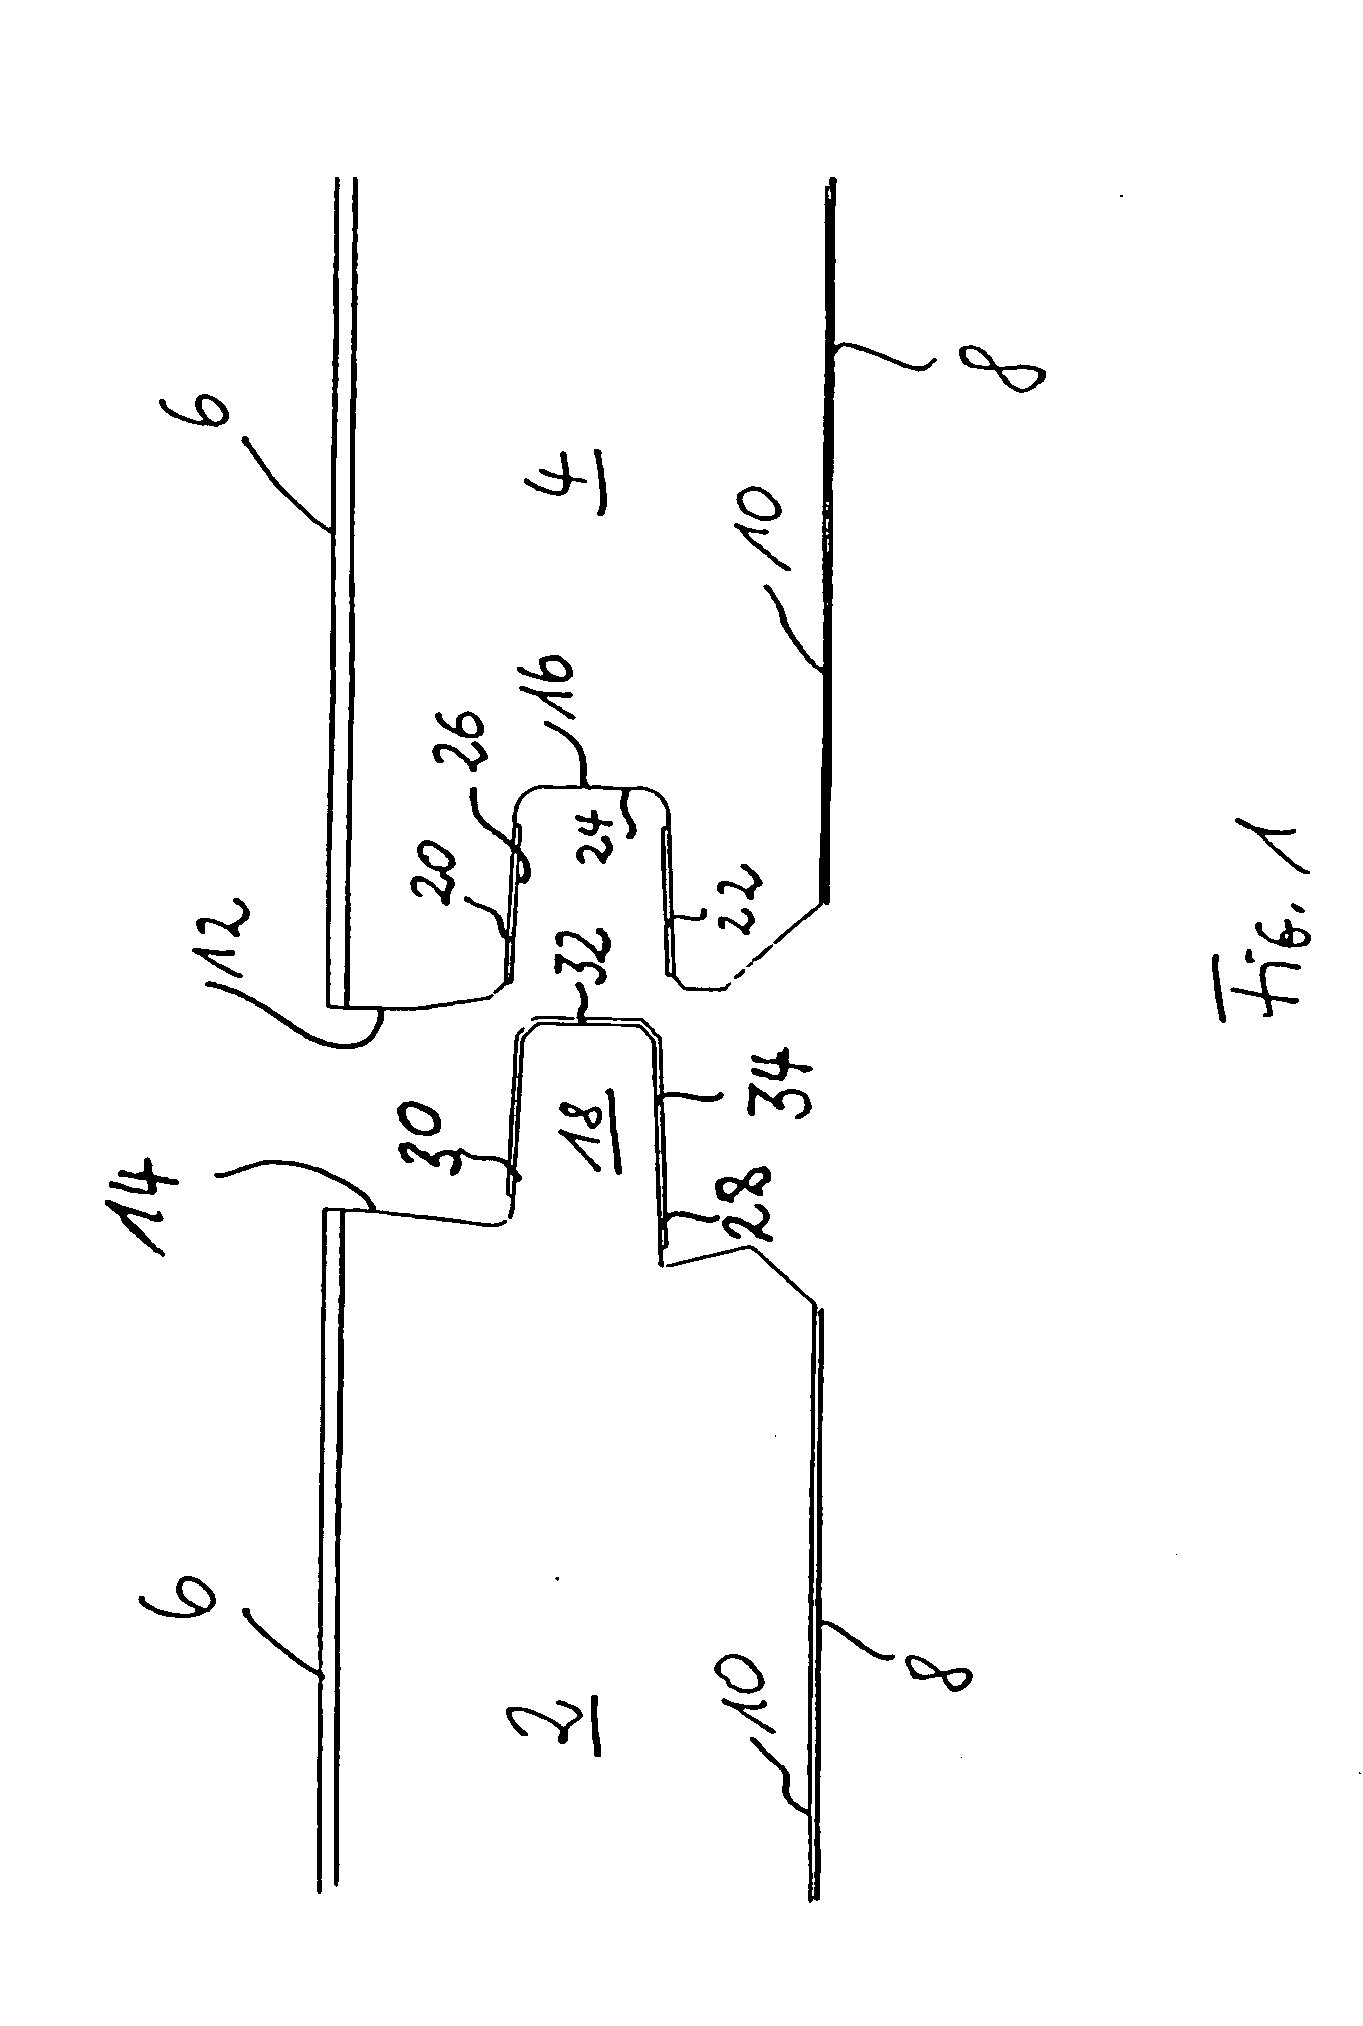 Method for coating an element with glue